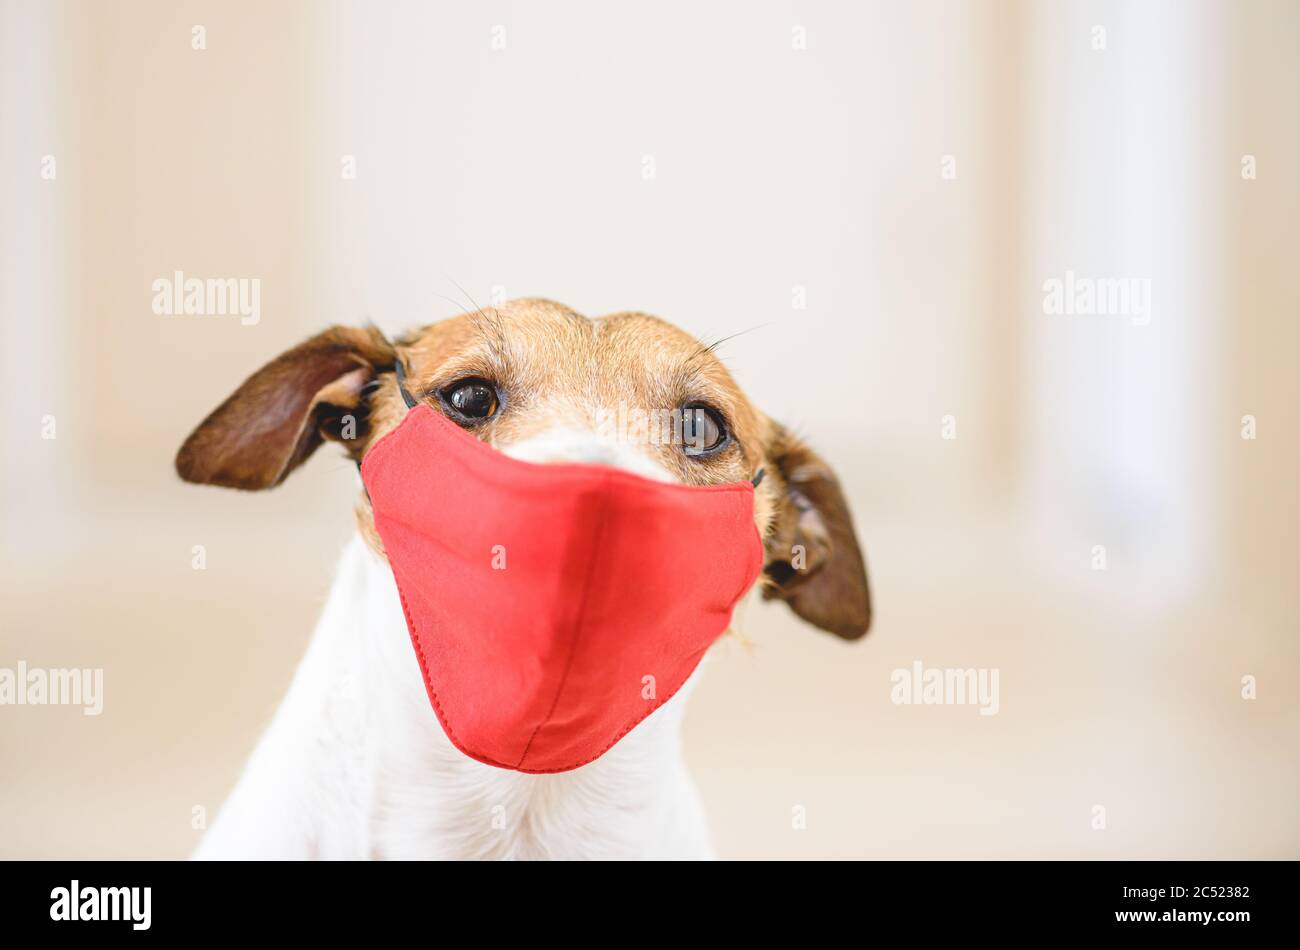 Funny dog wearing red medical face mask for protection against virus Stock Photo